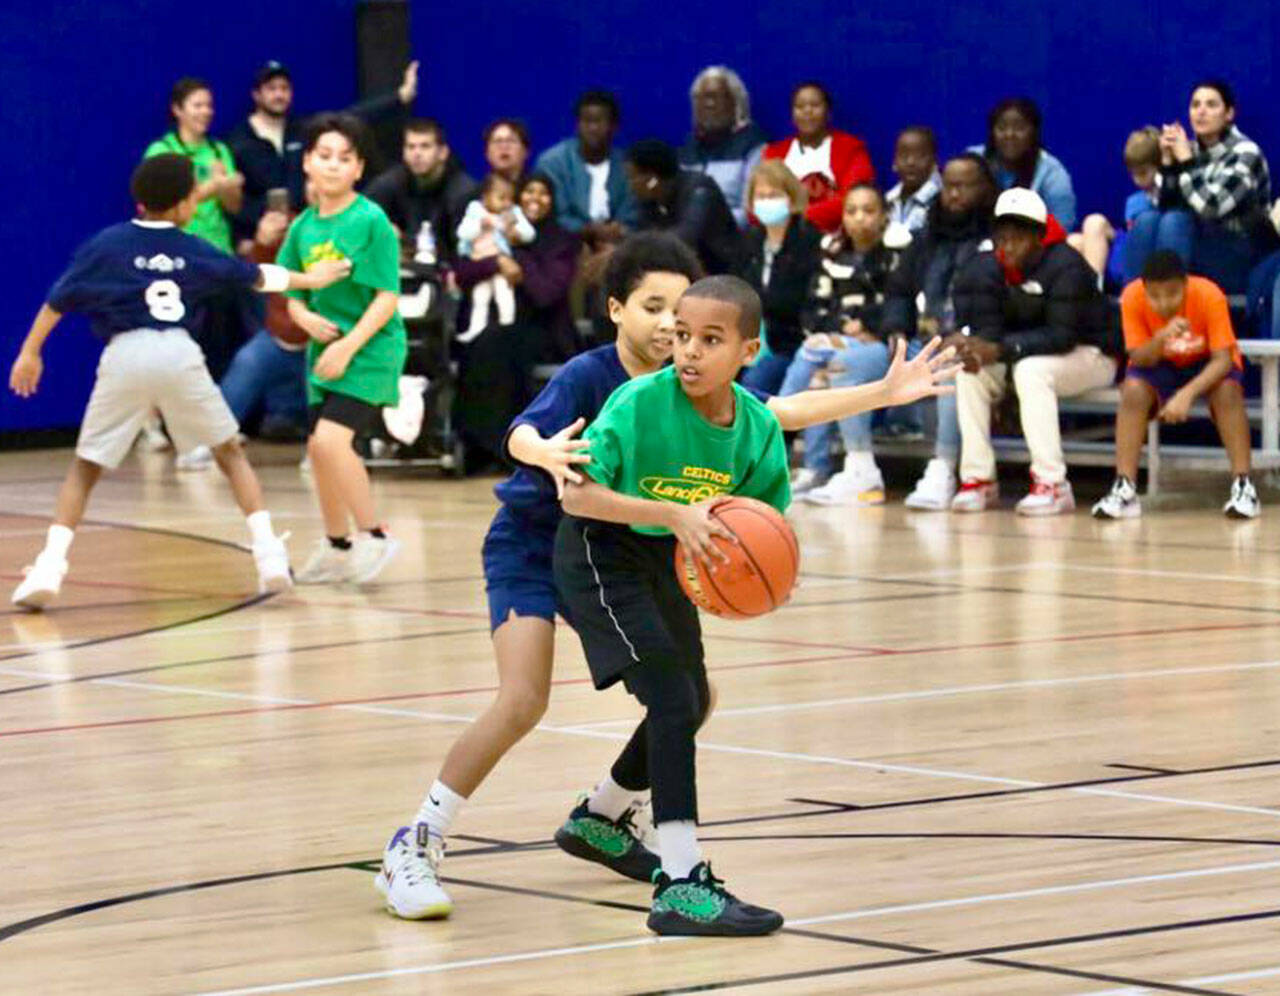 Players compete during opening week in January in the city of Kent Parks and Recreation league. COURTESY PHOTO, City of Kent Parks